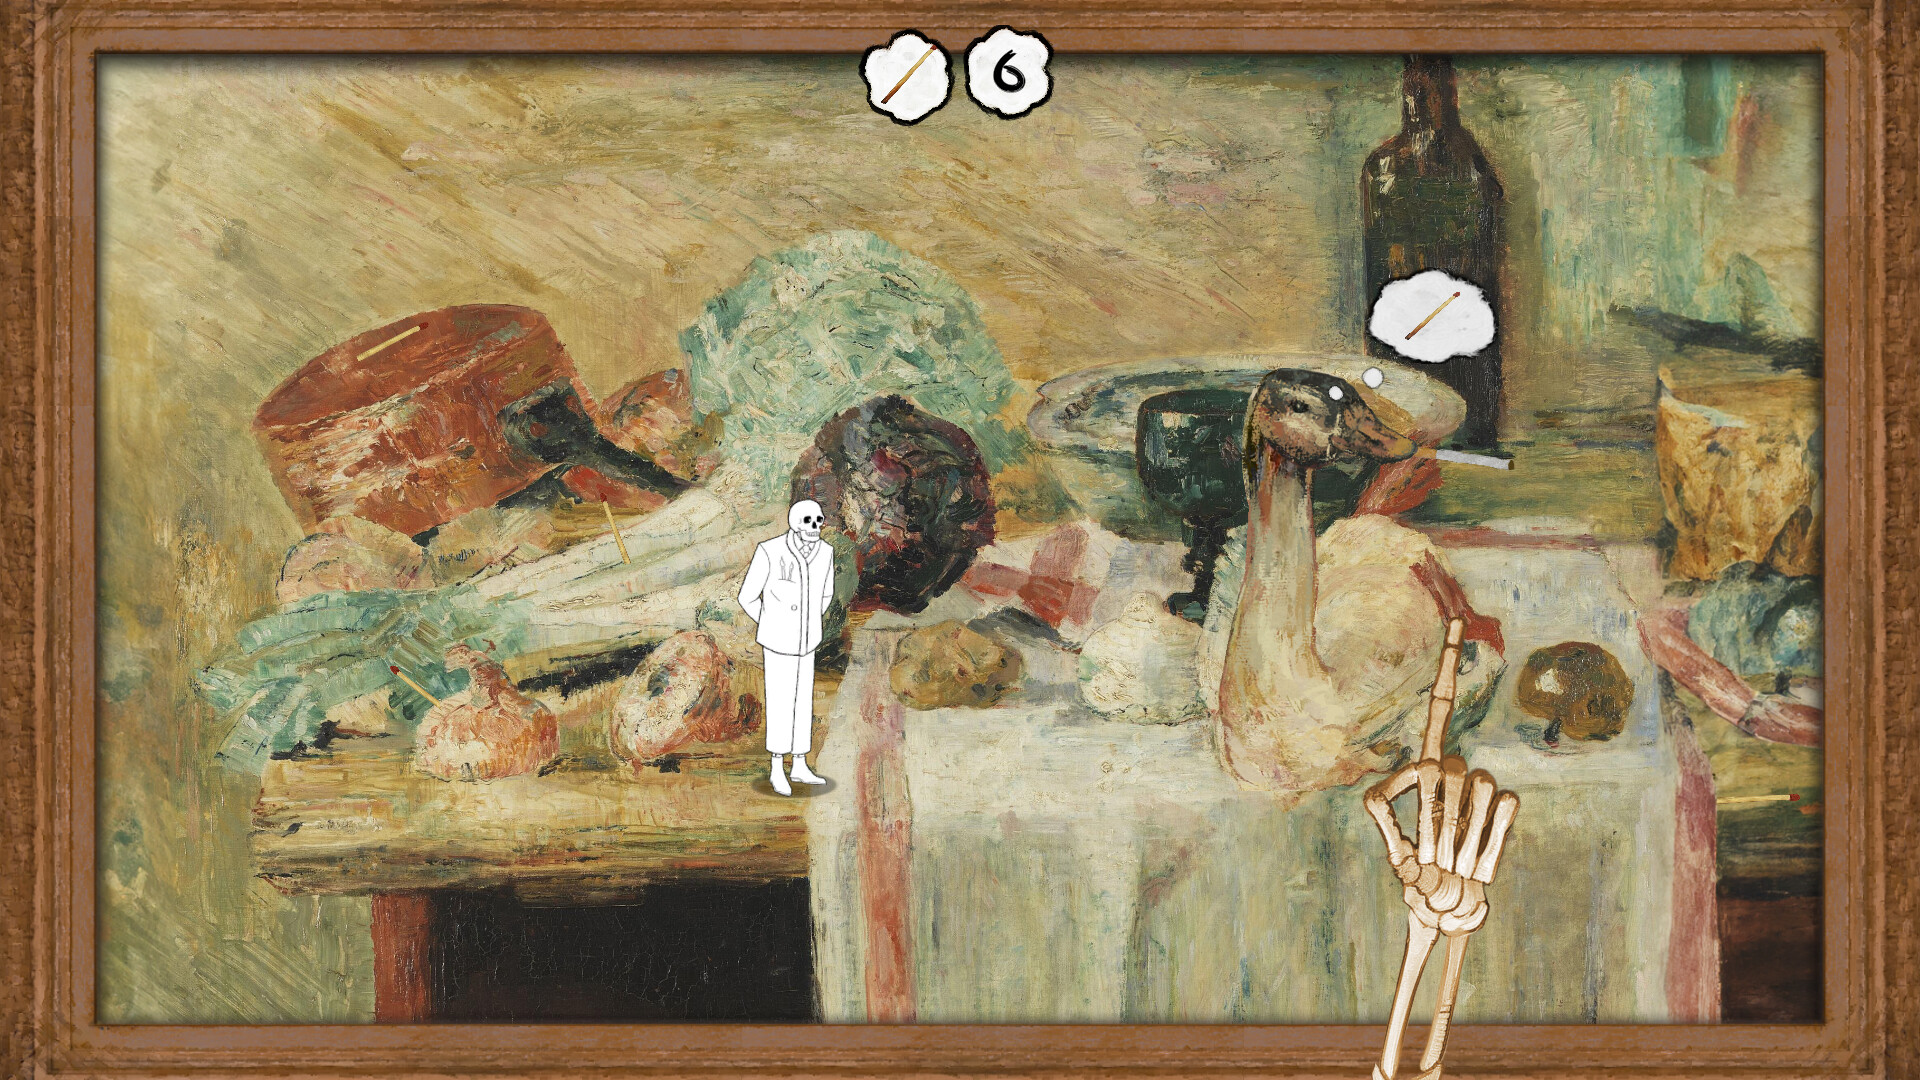 A skeleton touches a still life in Please, Touch the Artwork 2.